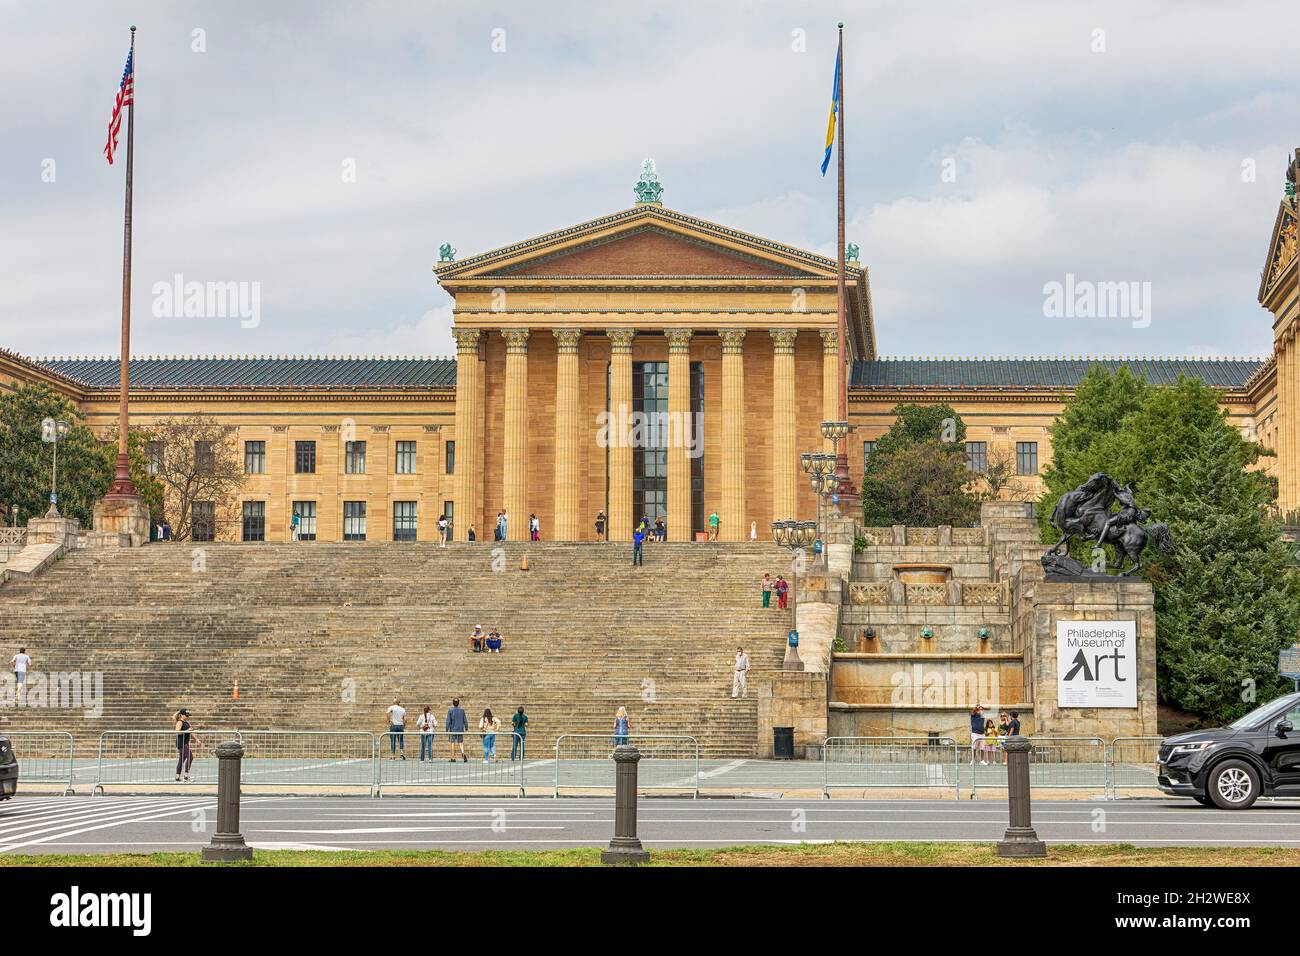 2600 Benjamin Franklin Parkway, Philadelphia Museum of Art, is centerpiece of the city's Museum District - and popular photographers' vantage point. Stock Photo